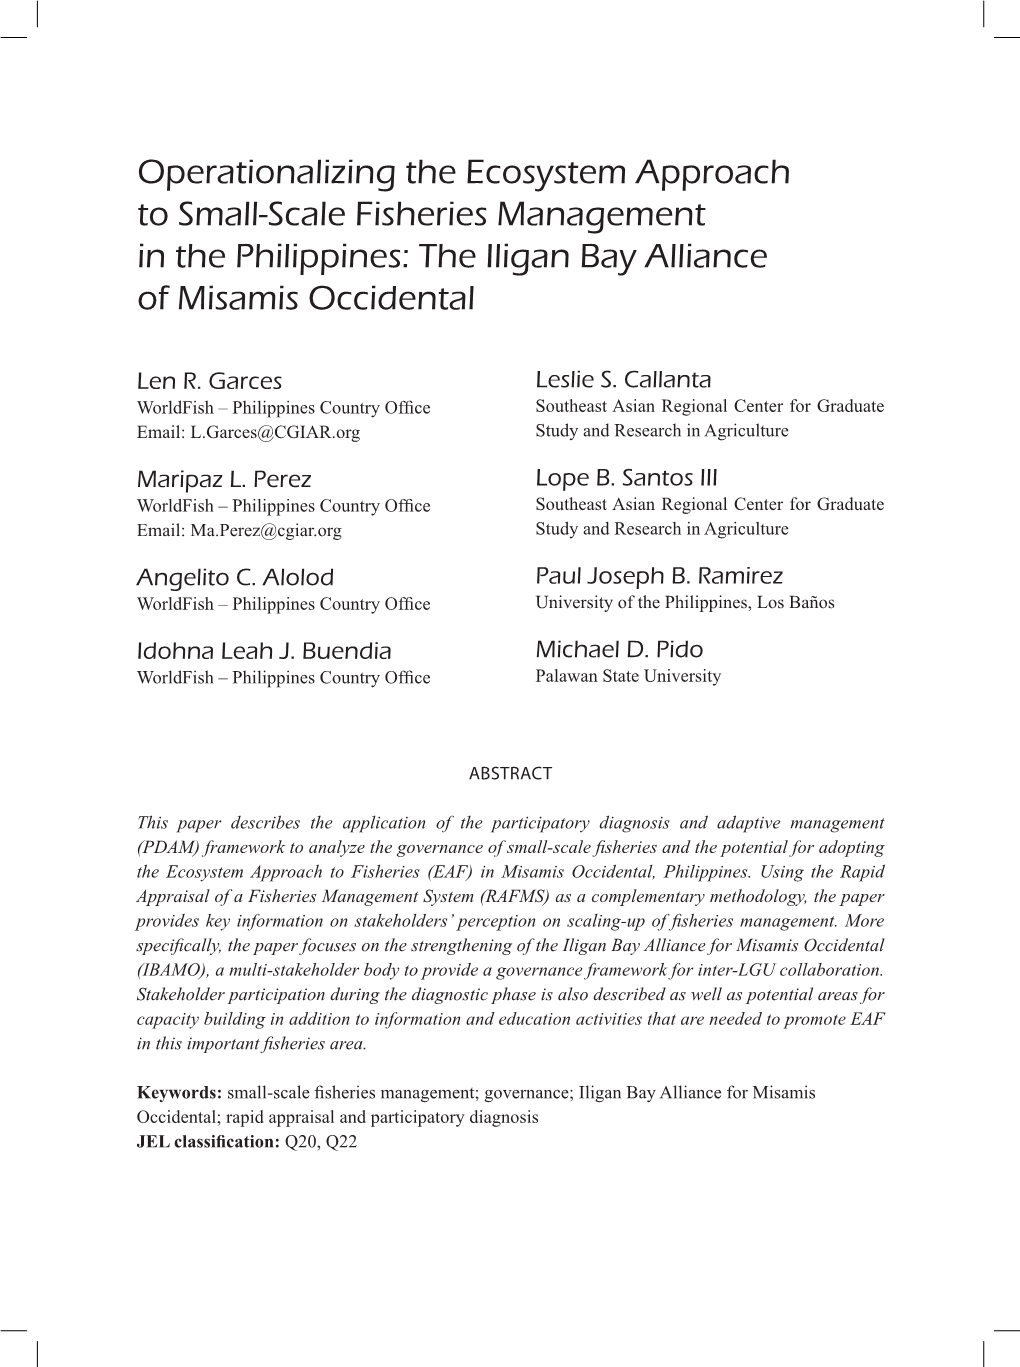 Operationalizing the Ecosystem Approach to Small-Scale Fisheries Management in the Philippines: the Iligan Bay Alliance of Misamis Occidental